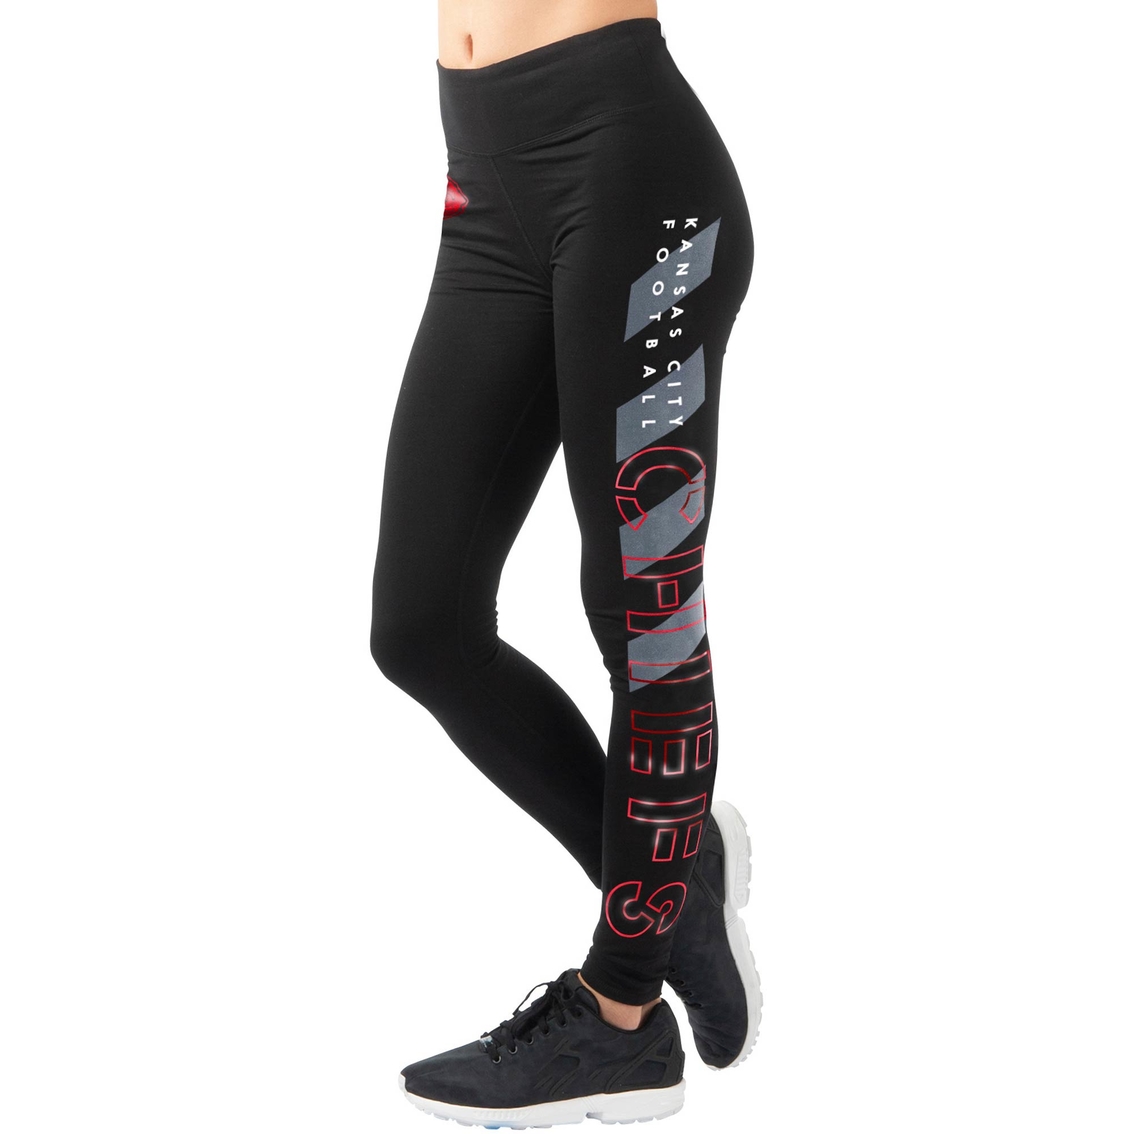 Touch By Alyssa Milano Nfl Women's Luster Leggings, Pants & Capris, Clothing & Accessories